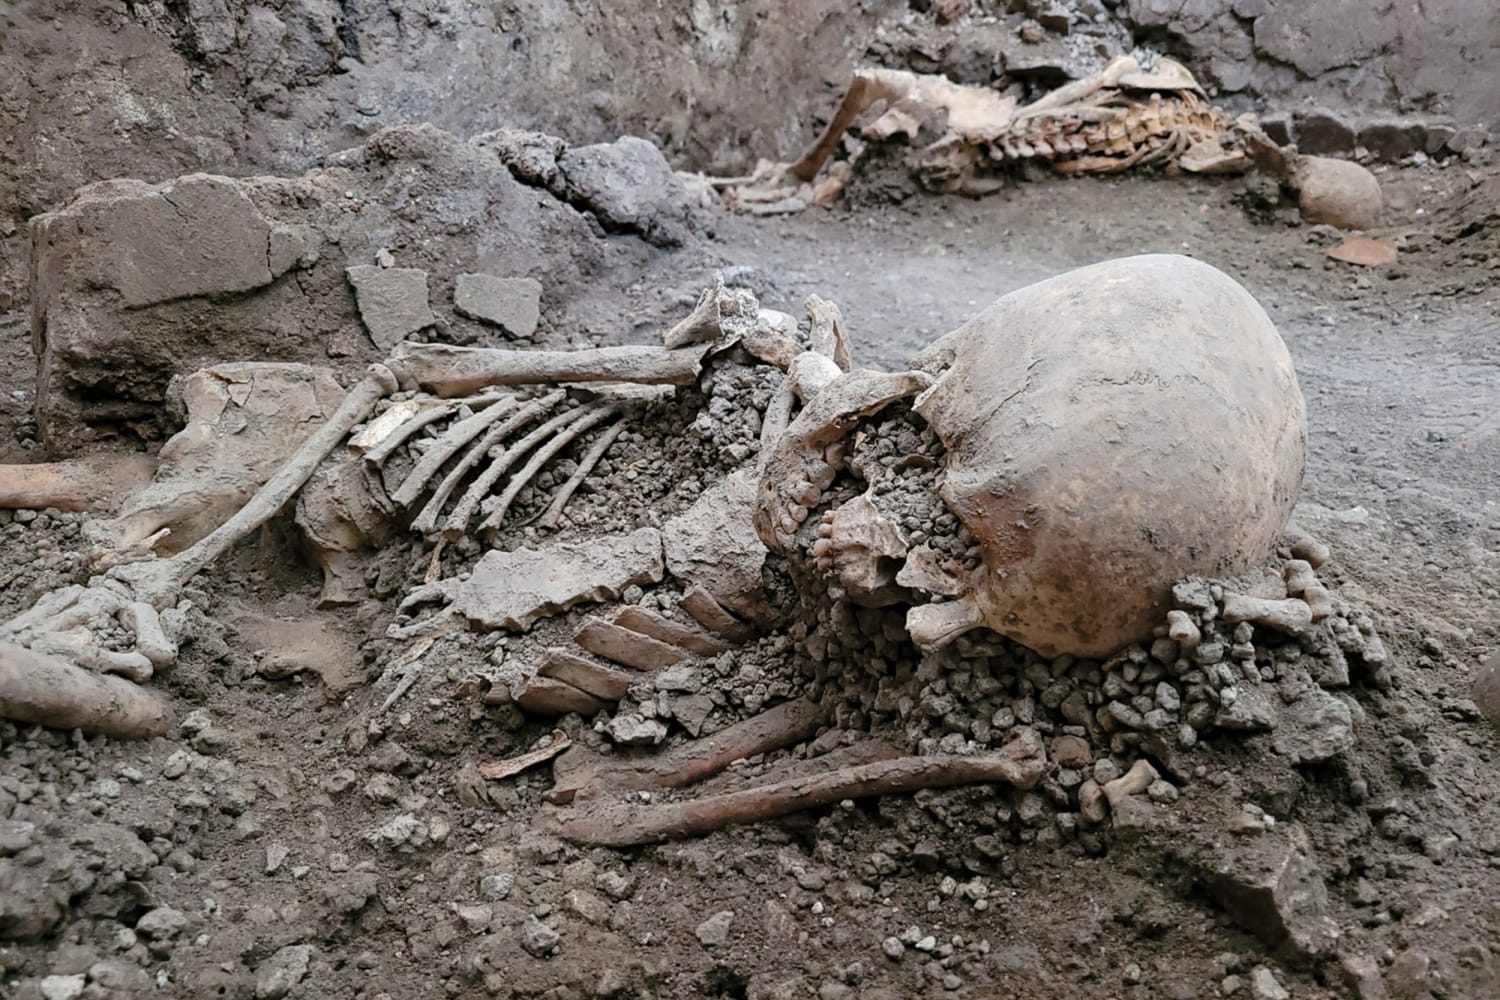 Pompeii skeletons discovered show deadly Vesuvius earthquake